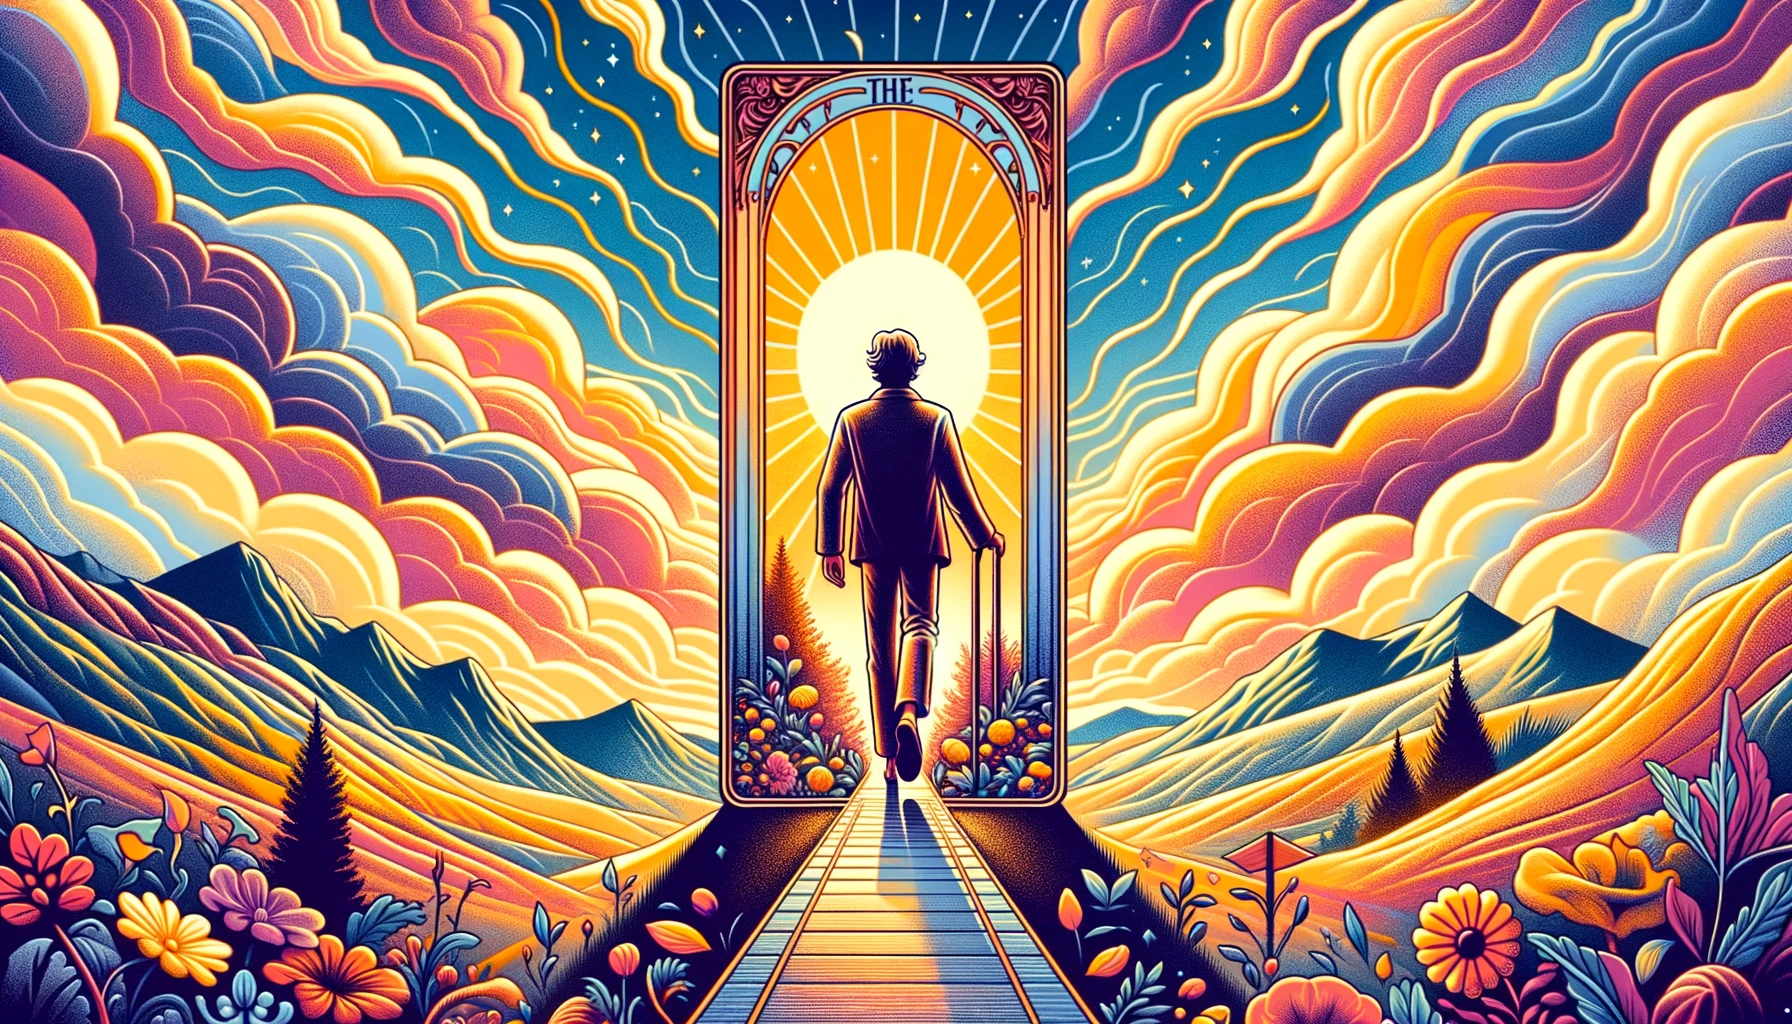 "An illustration representing the interpretation of 'The Fool' Tarot card's meaning in terms of feelings, featuring a figure embarking on a journey with a sense of excitement and curiosity, surrounded by symbols of adventure and exploration, evoking emotions of eagerness, openness, and the thrill of discovery."